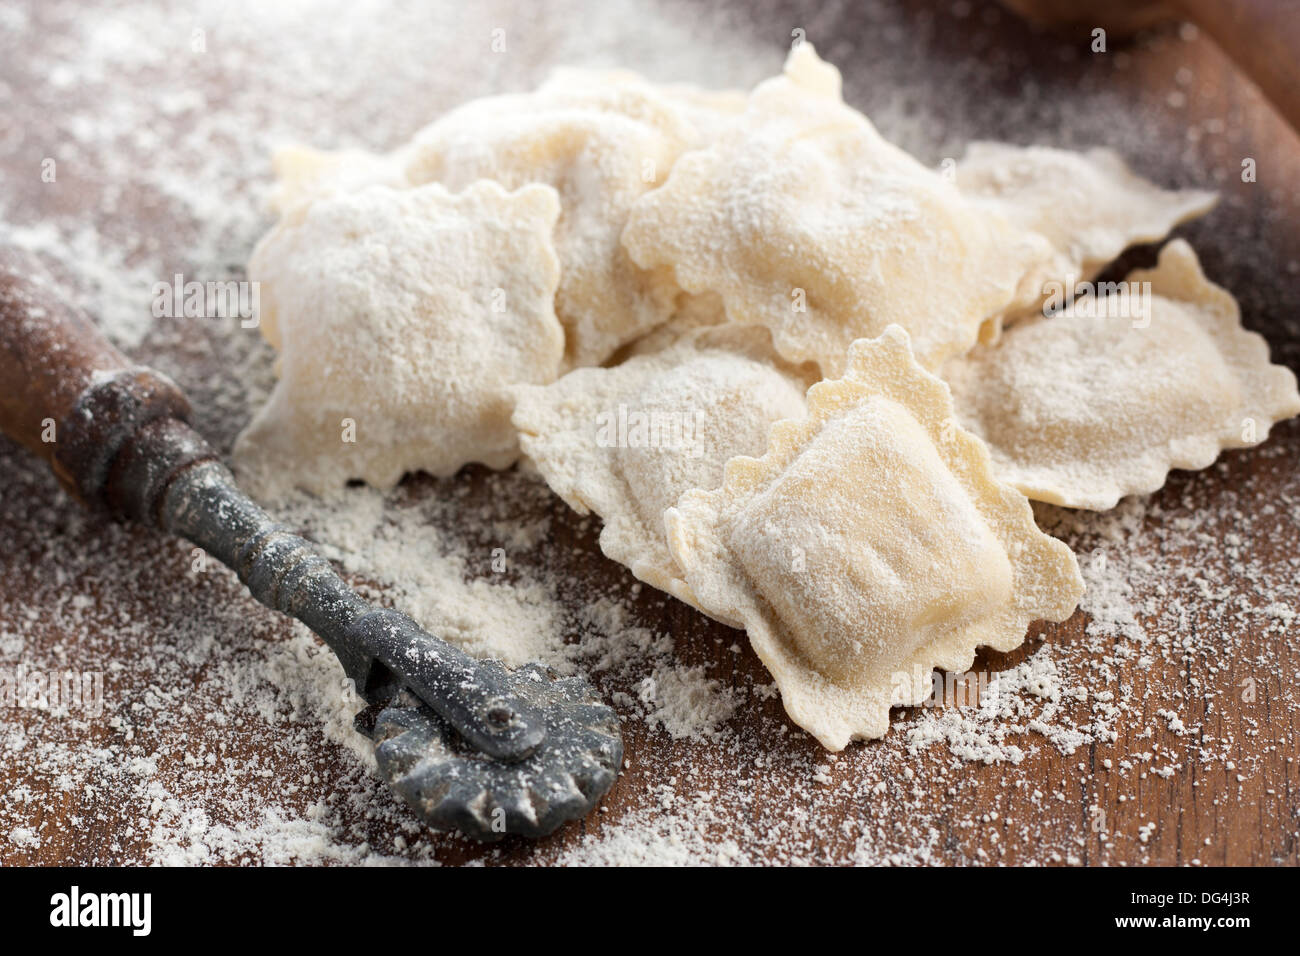 Preparing delicious homemade ravioli with a roller Stock Photo